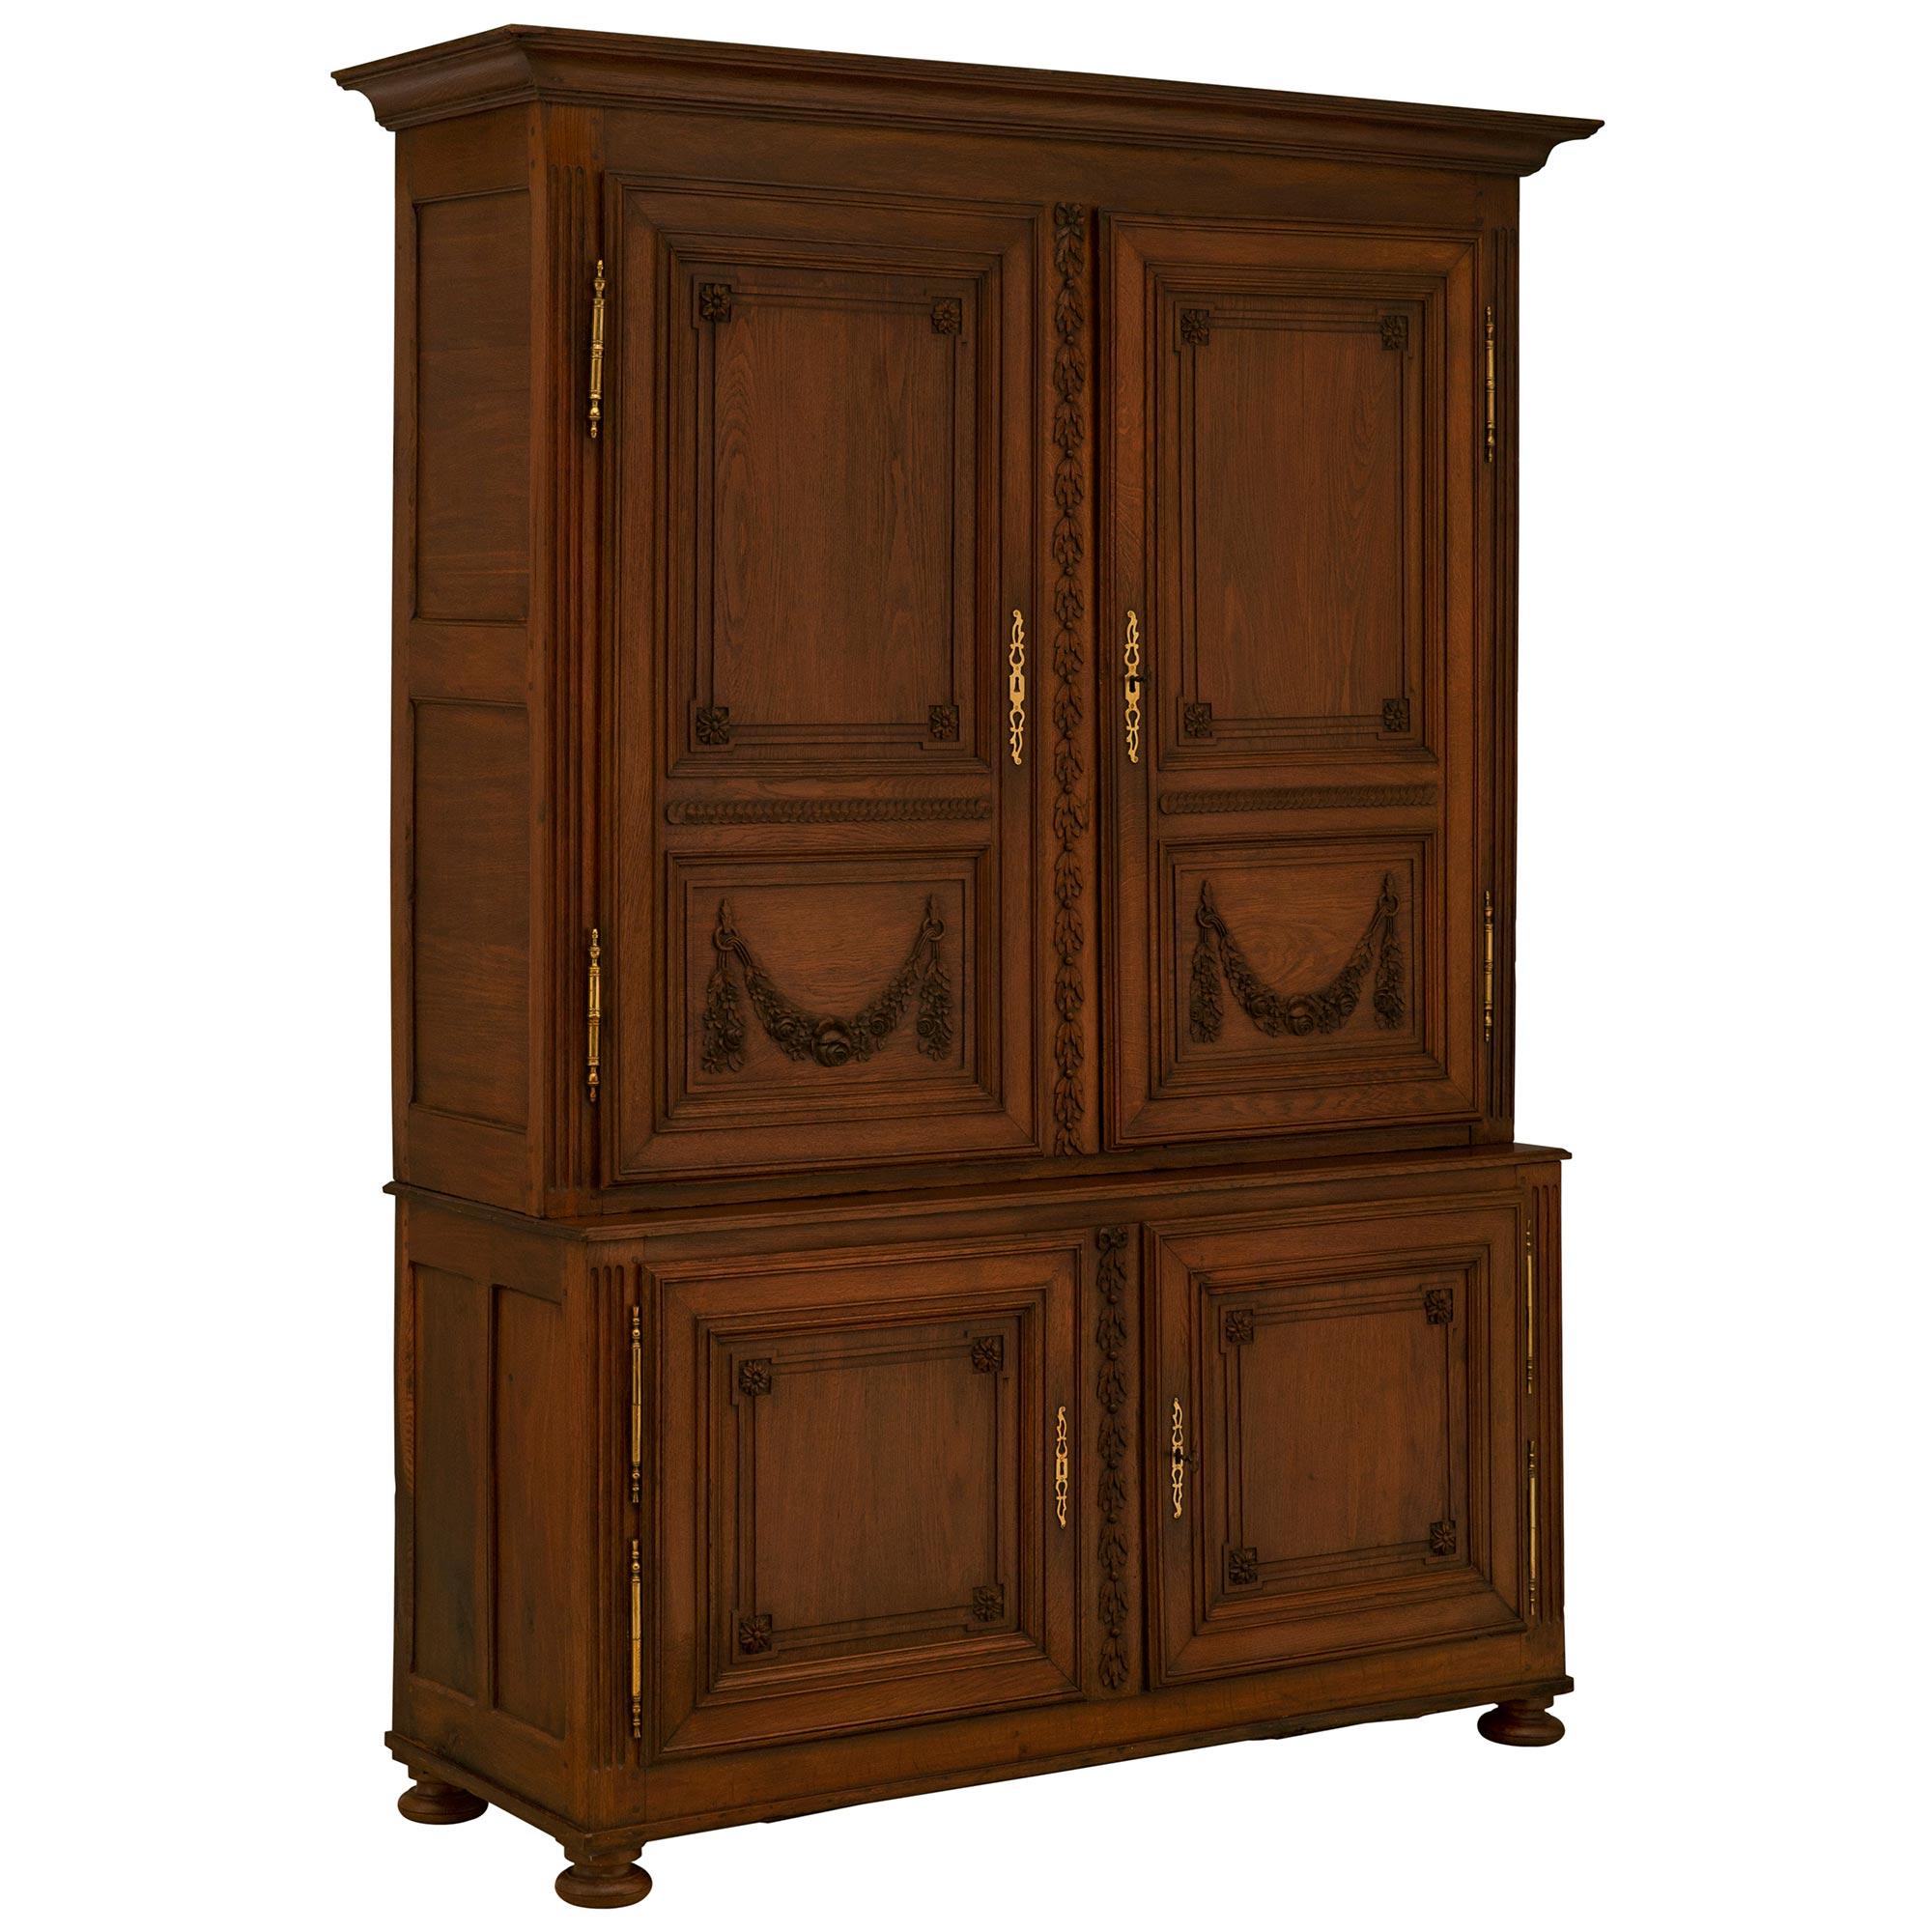 French 18th Century Louis XVI Period Honey Oak Armoire In Good Condition For Sale In West Palm Beach, FL